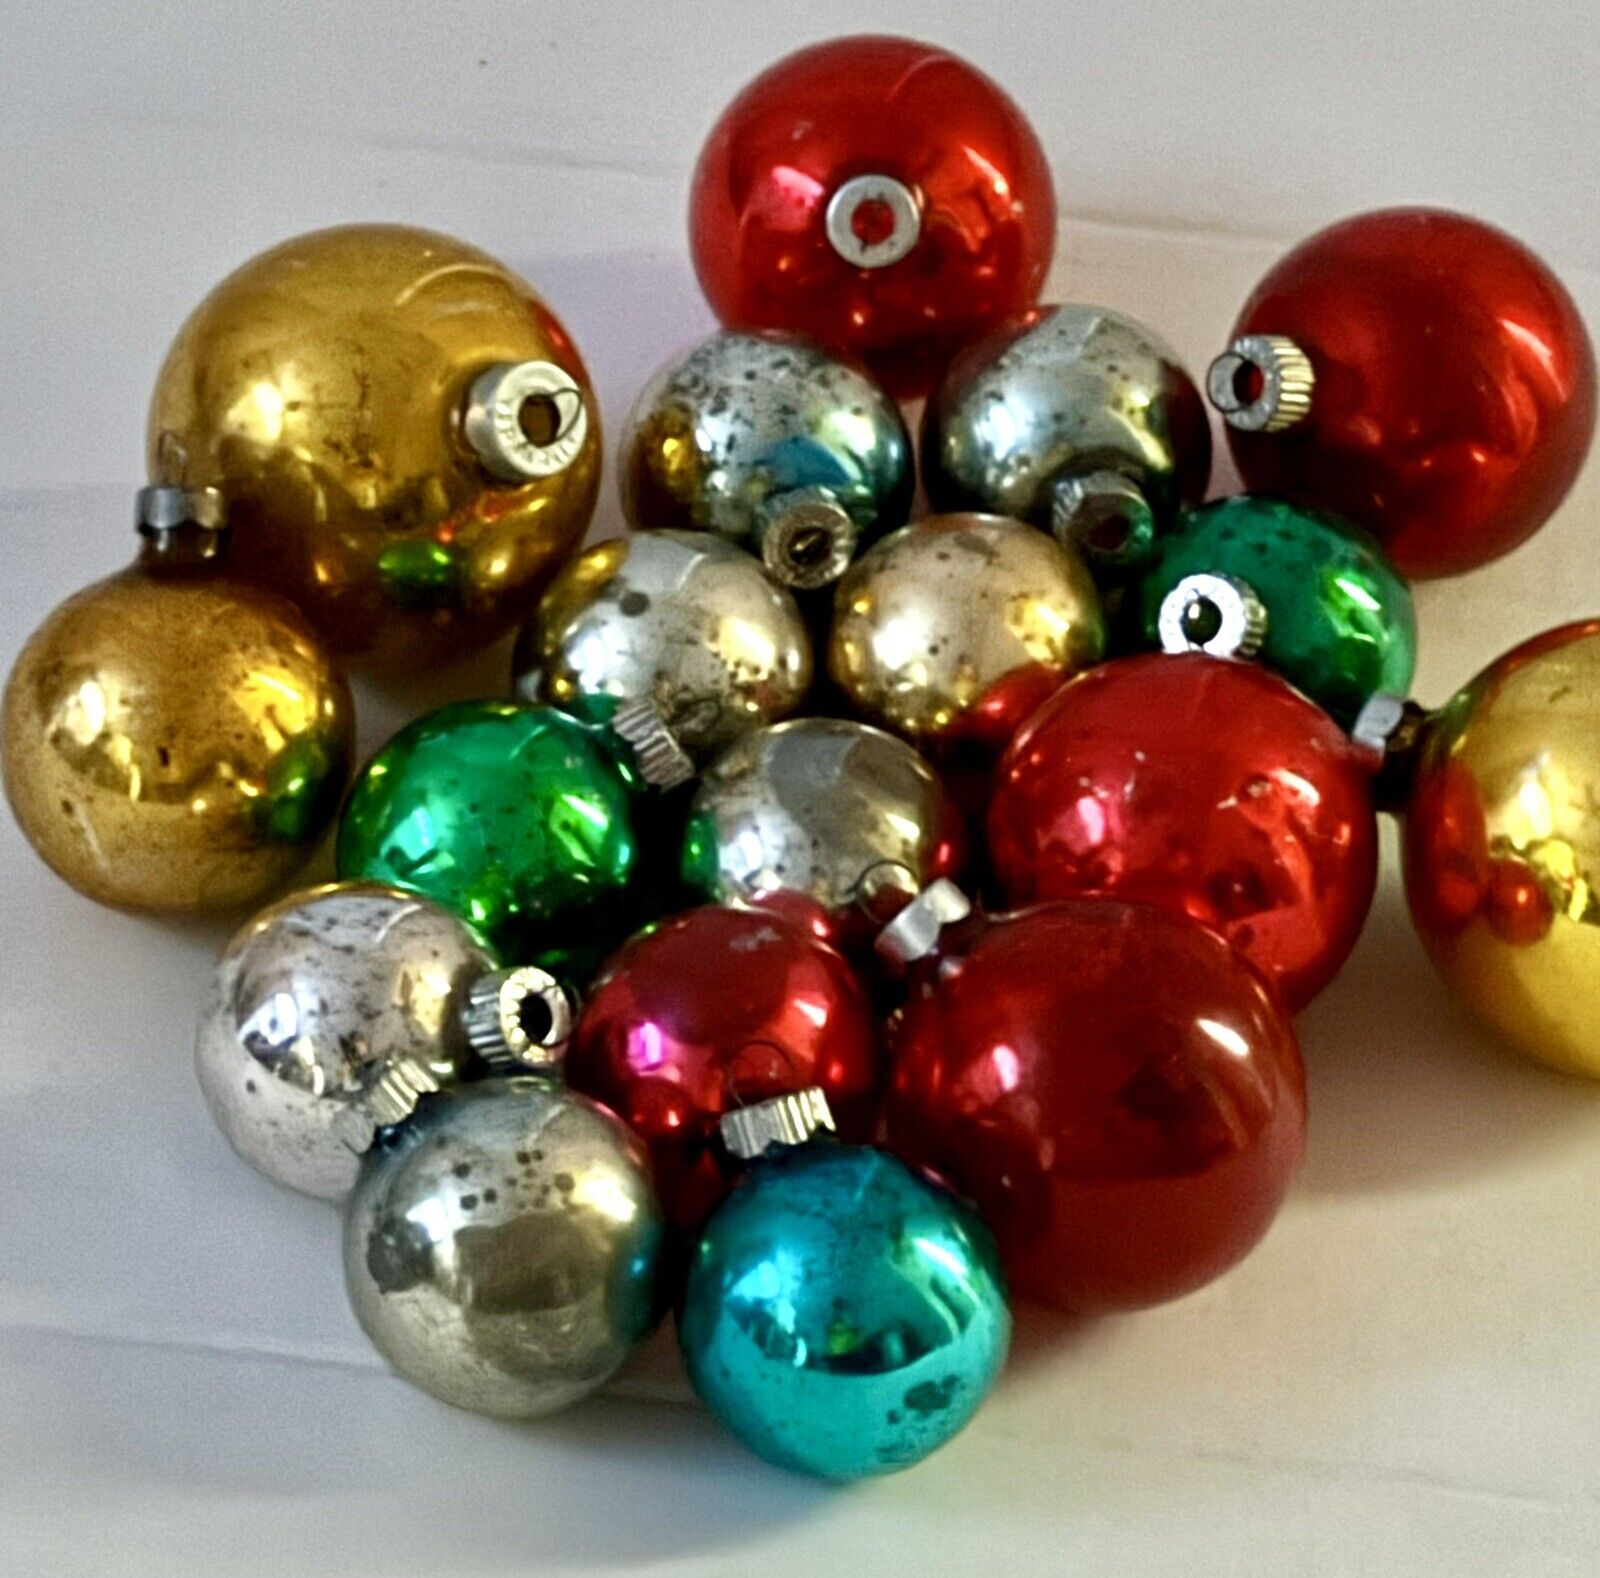 18 Vintage Christmas Ball Ornaments Mercury Made in US of A Old Shiny Bright